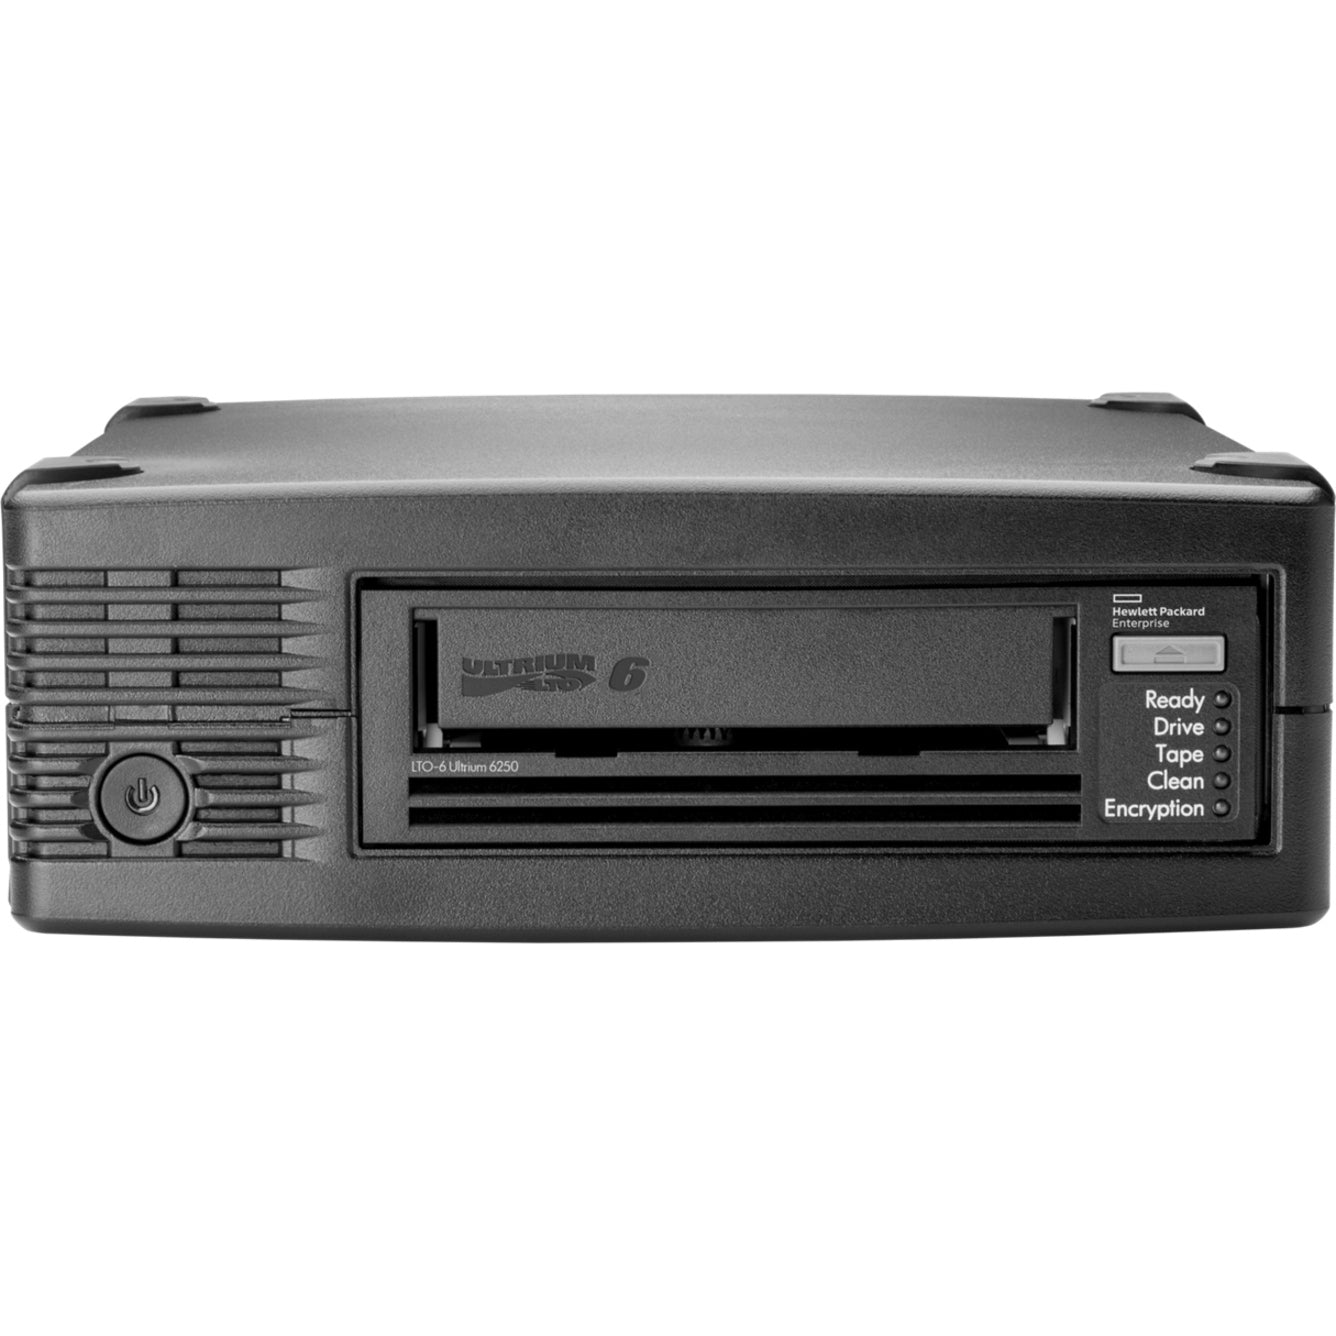 HPE StoreEver LTO-6 Ultrium 6250 Internal Tape Drive, 2.5TB Native Capacity, 6.25TB Compressed Capacity